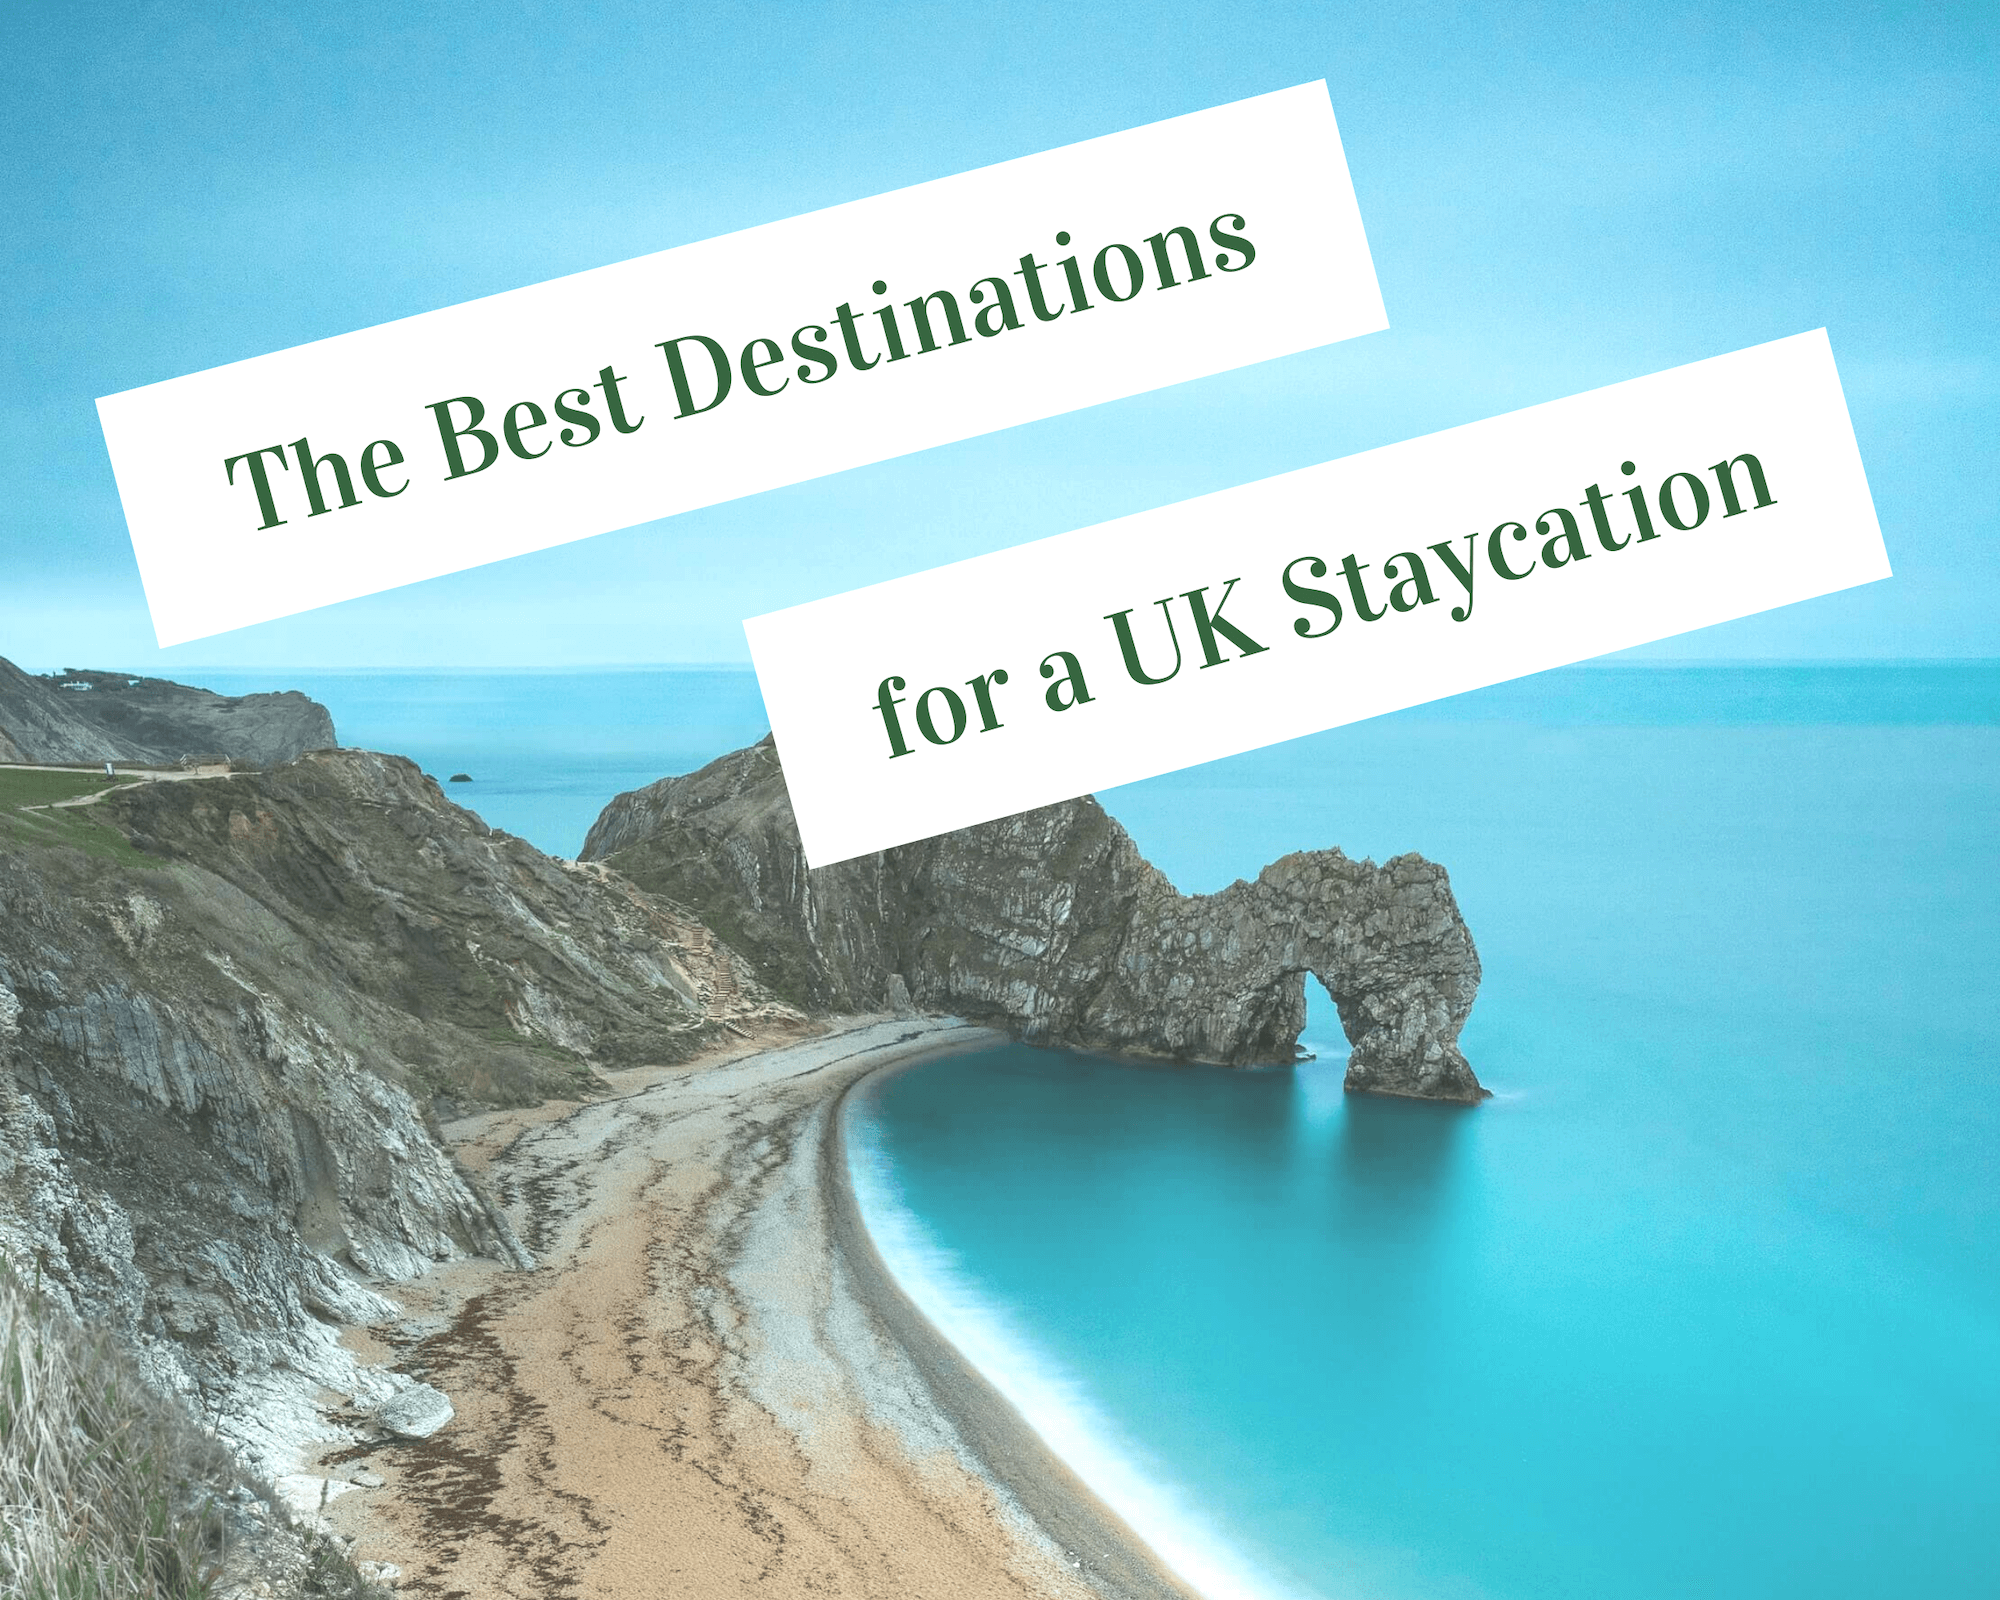 The best destinations for a UK staycation